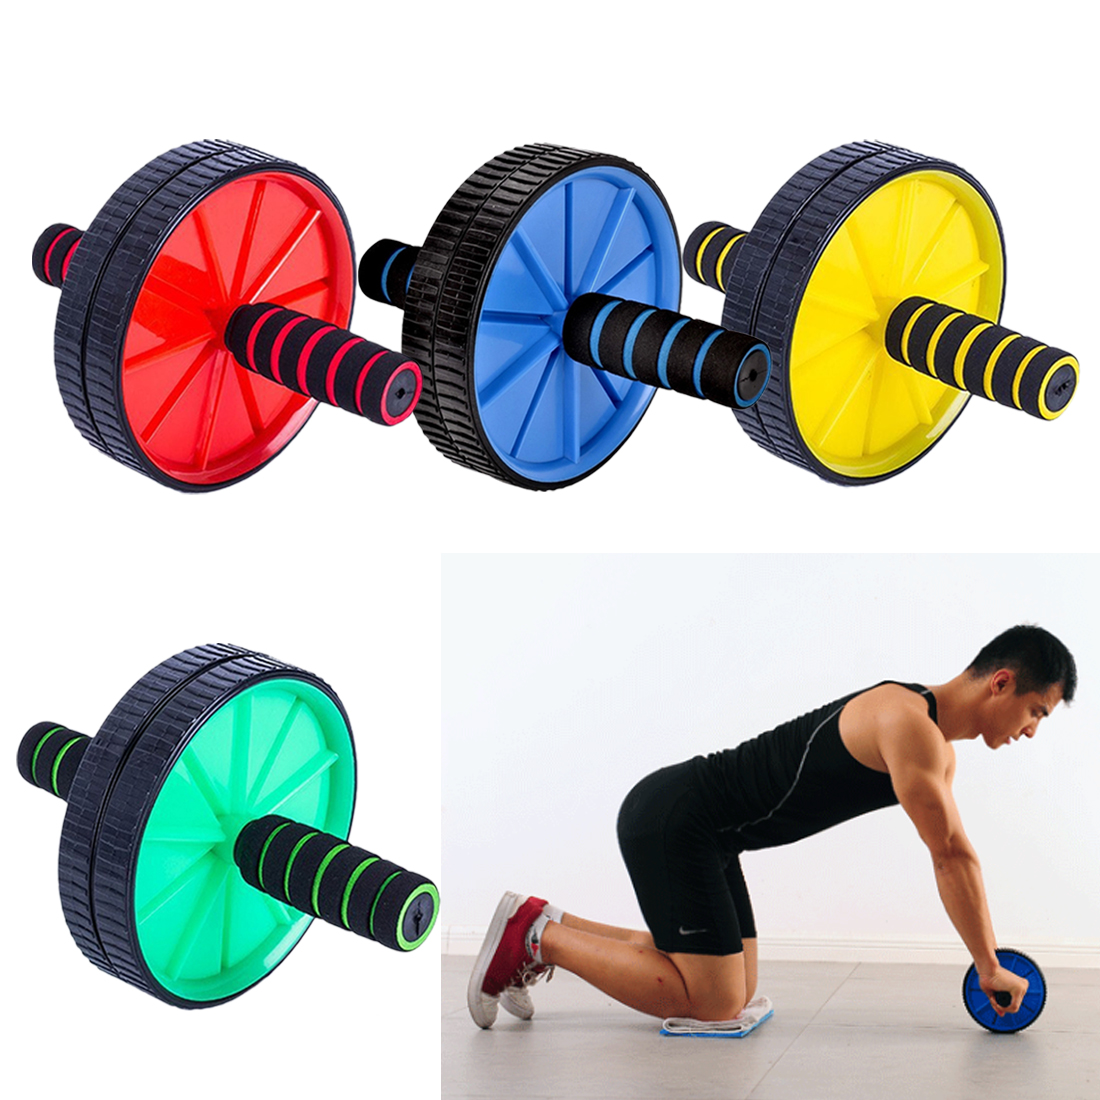 Professional Double-wheeled Updated Ab Abdominal Press Wheel Rollers Crossfit Gym Exercise Equipment for Body Building Fitness